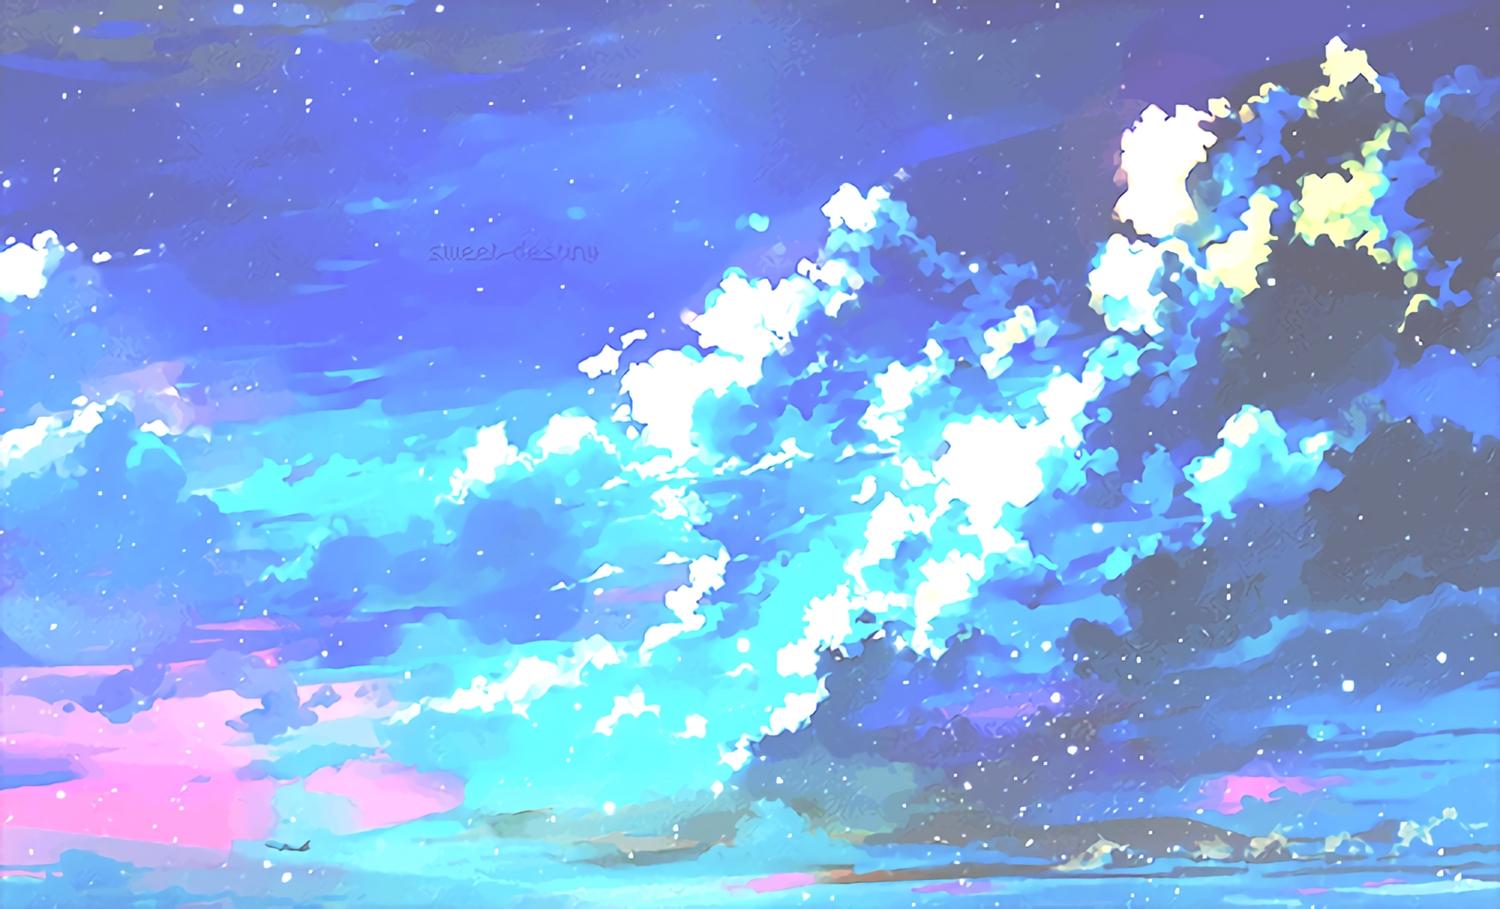 Anime Sky Wallpaper by さき